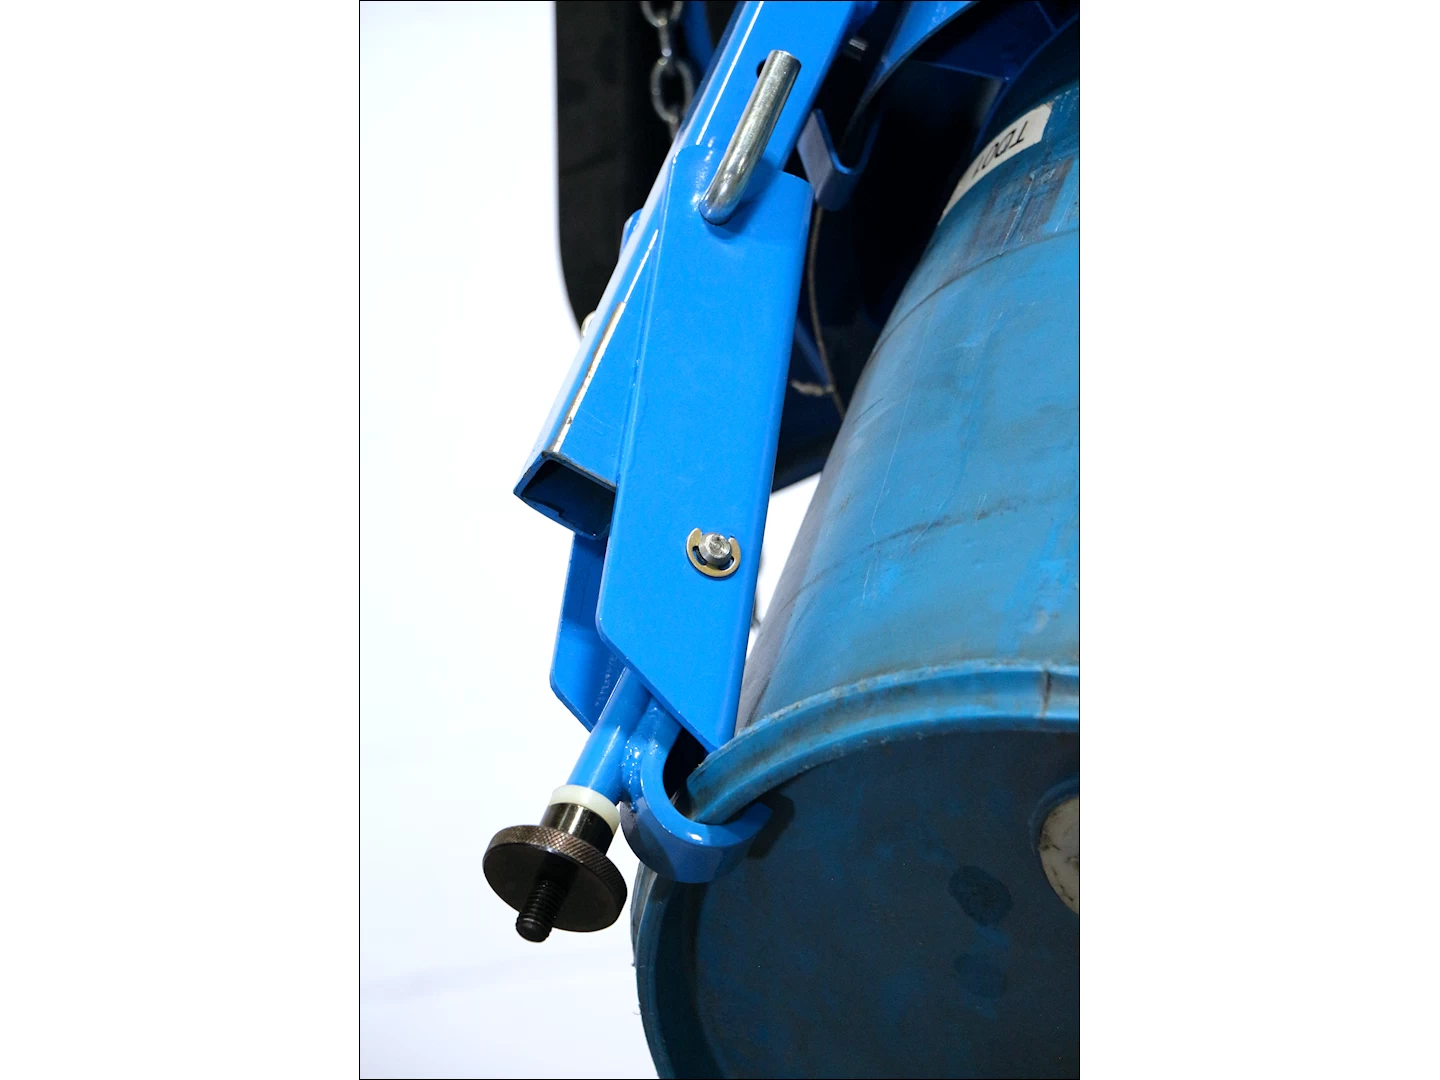 While dispensing drum, the Top Rim Clamp Kit prevents it from slipping length-ways